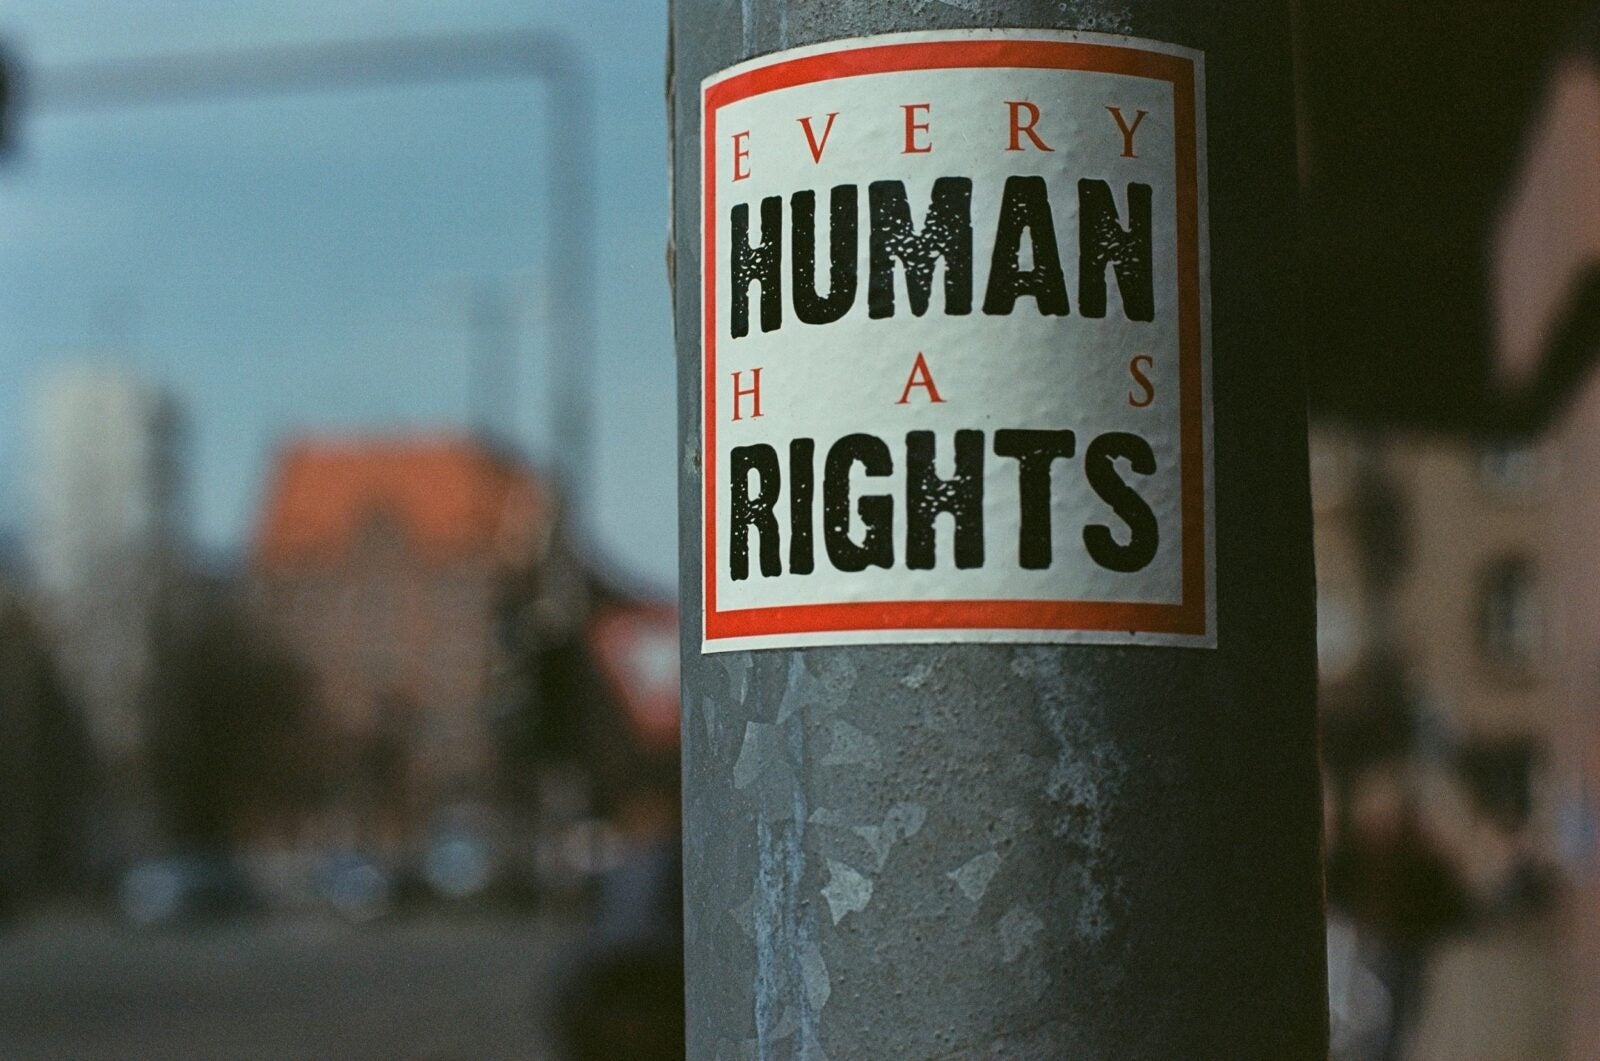 Sing: Every human has rights
Photo by Markus Spiske on Unsplash